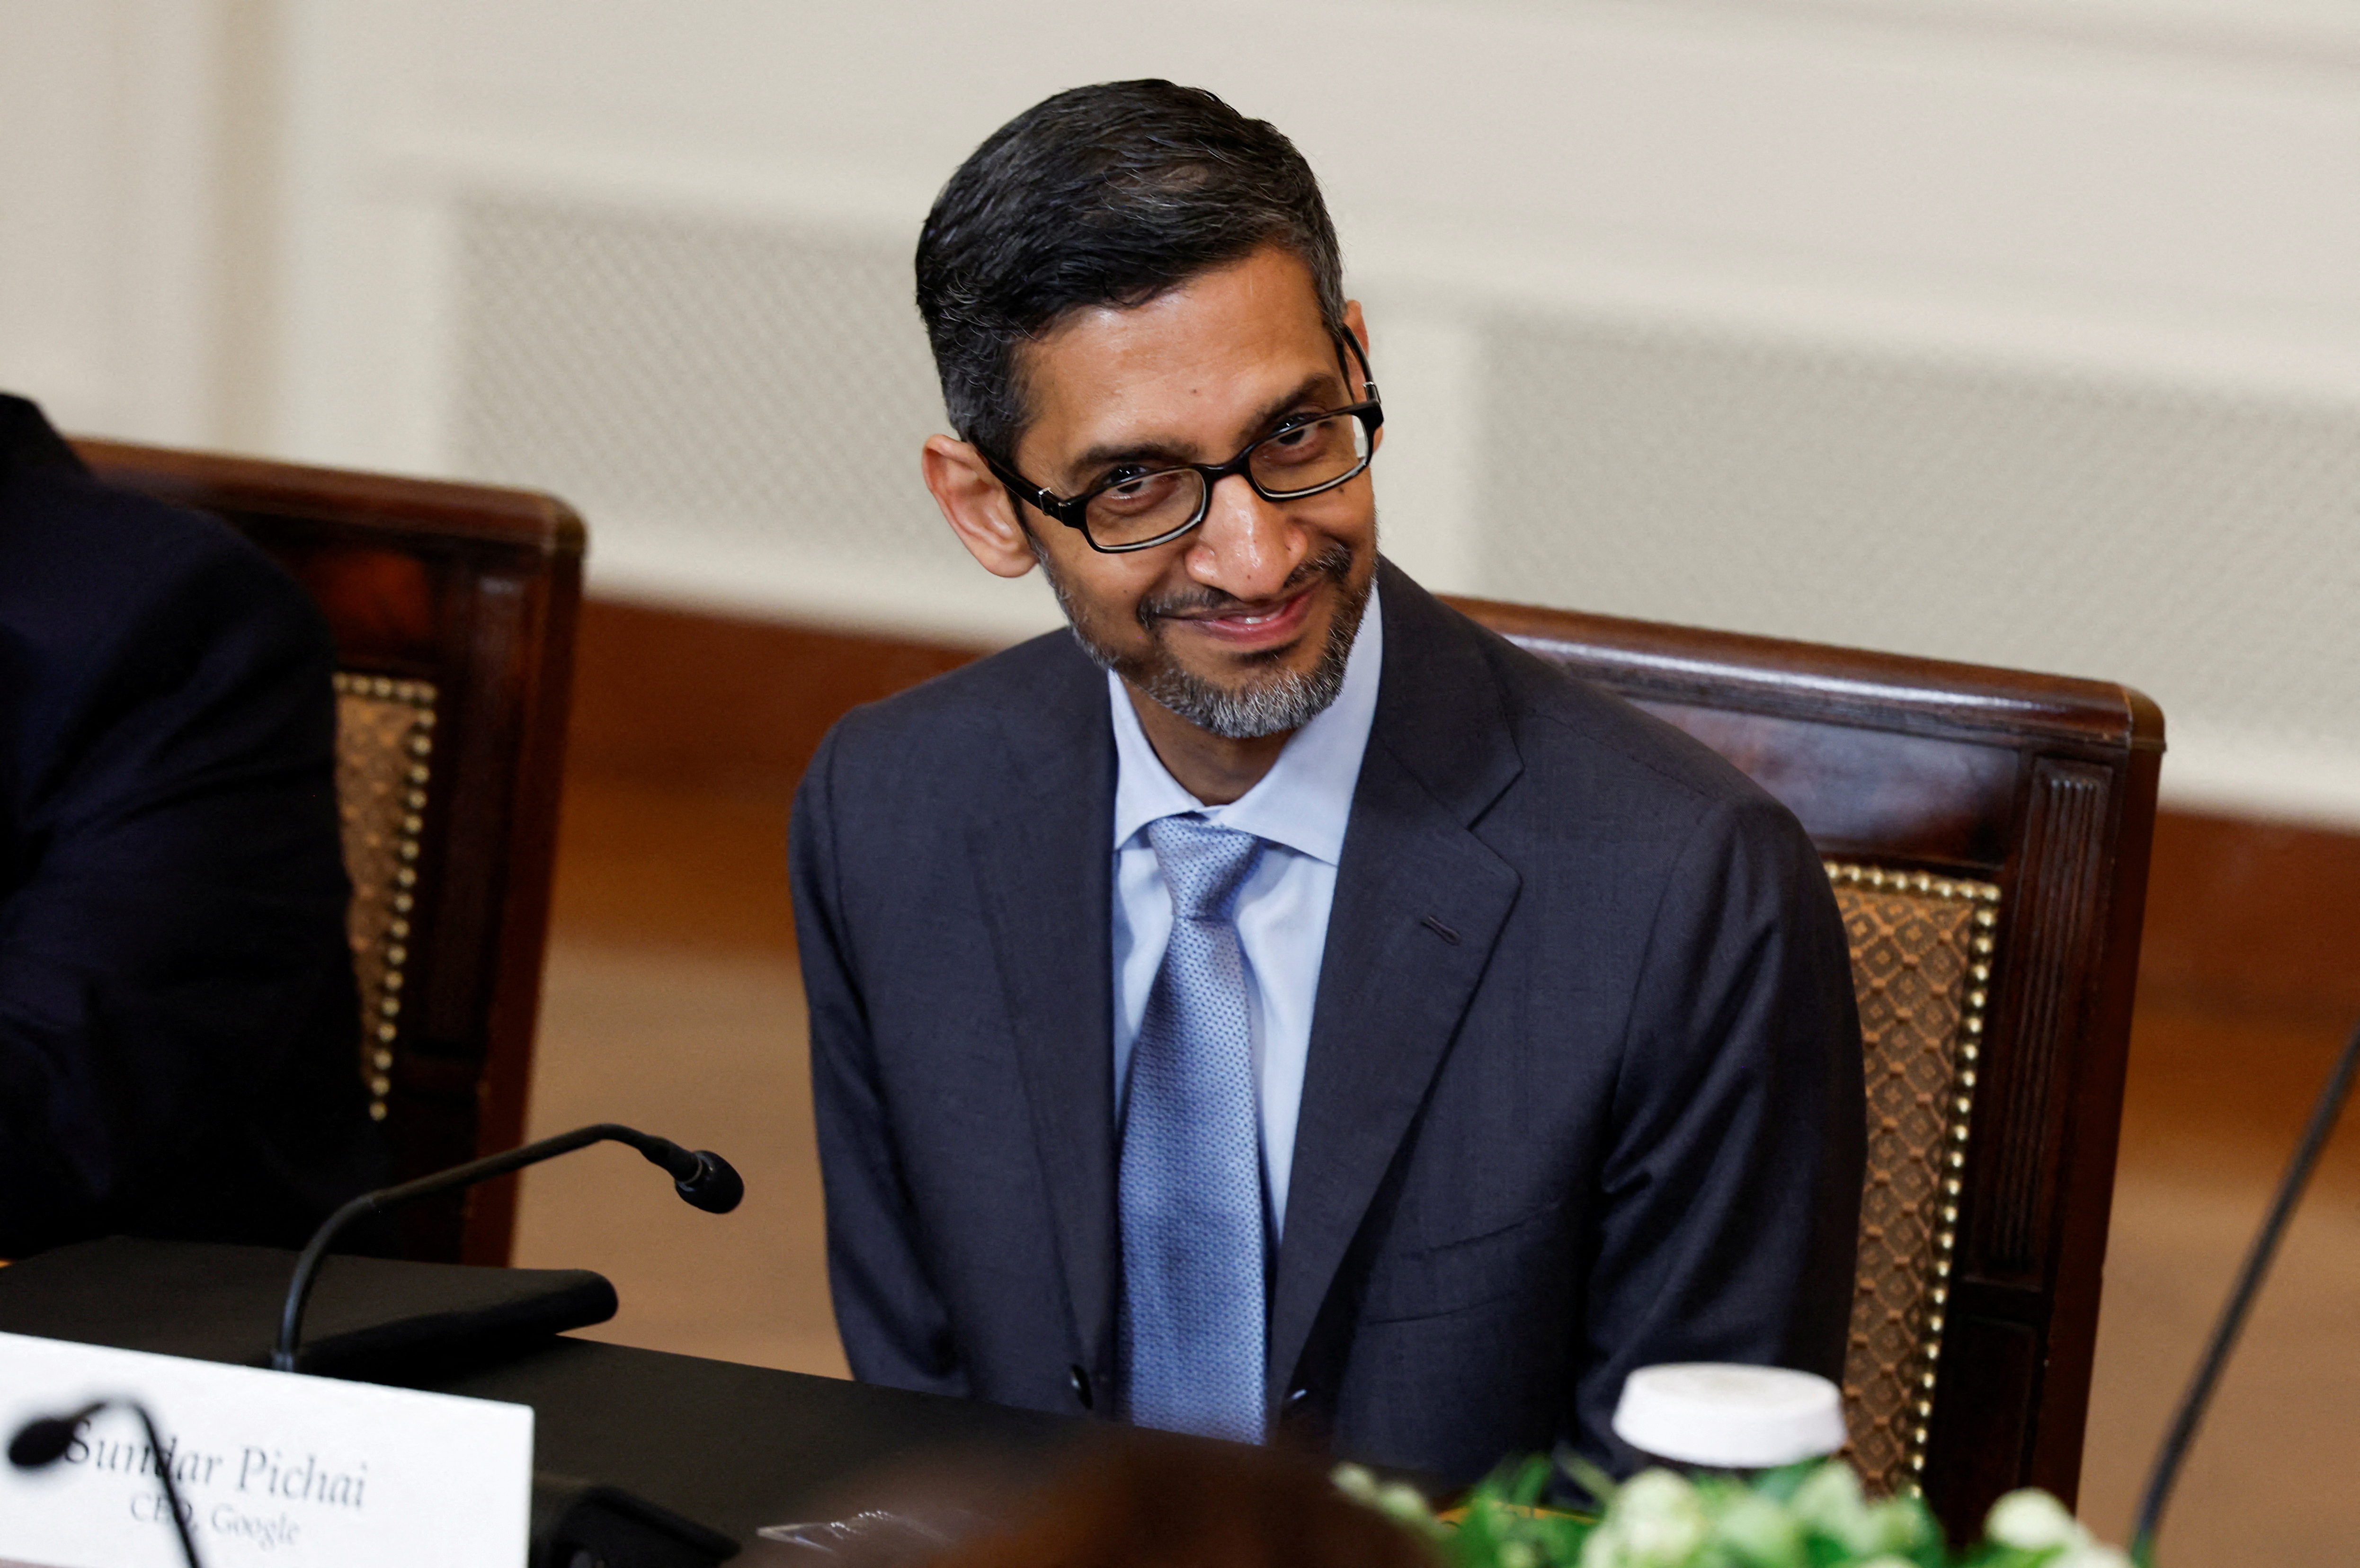 Sundar Pichai, CEO of Google, during a meeting with U.S. President Biden and India's Prime Minister Modi in Washington